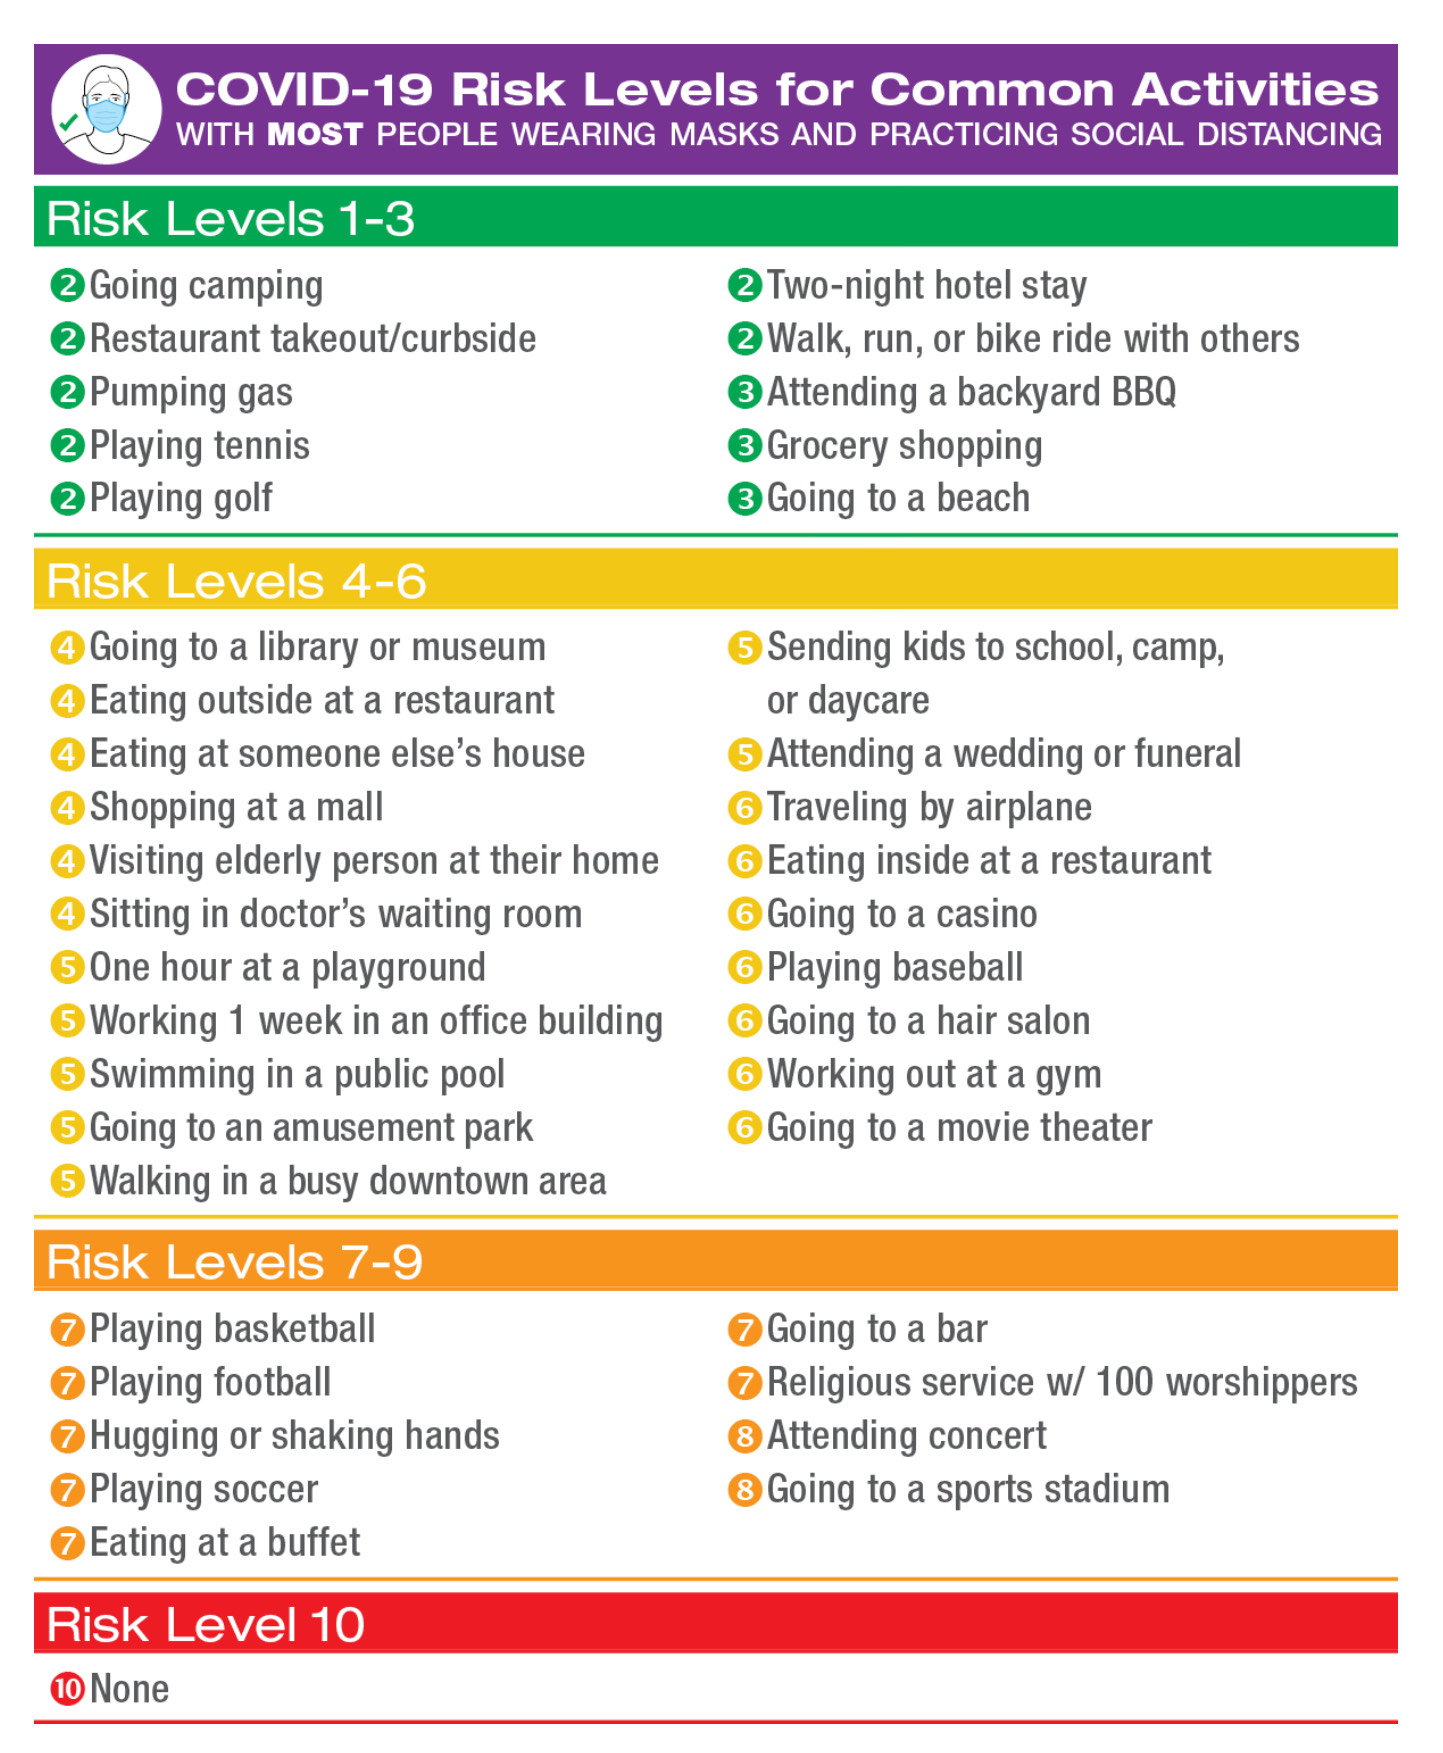 Convid-19 Risk Levels for Common Activities